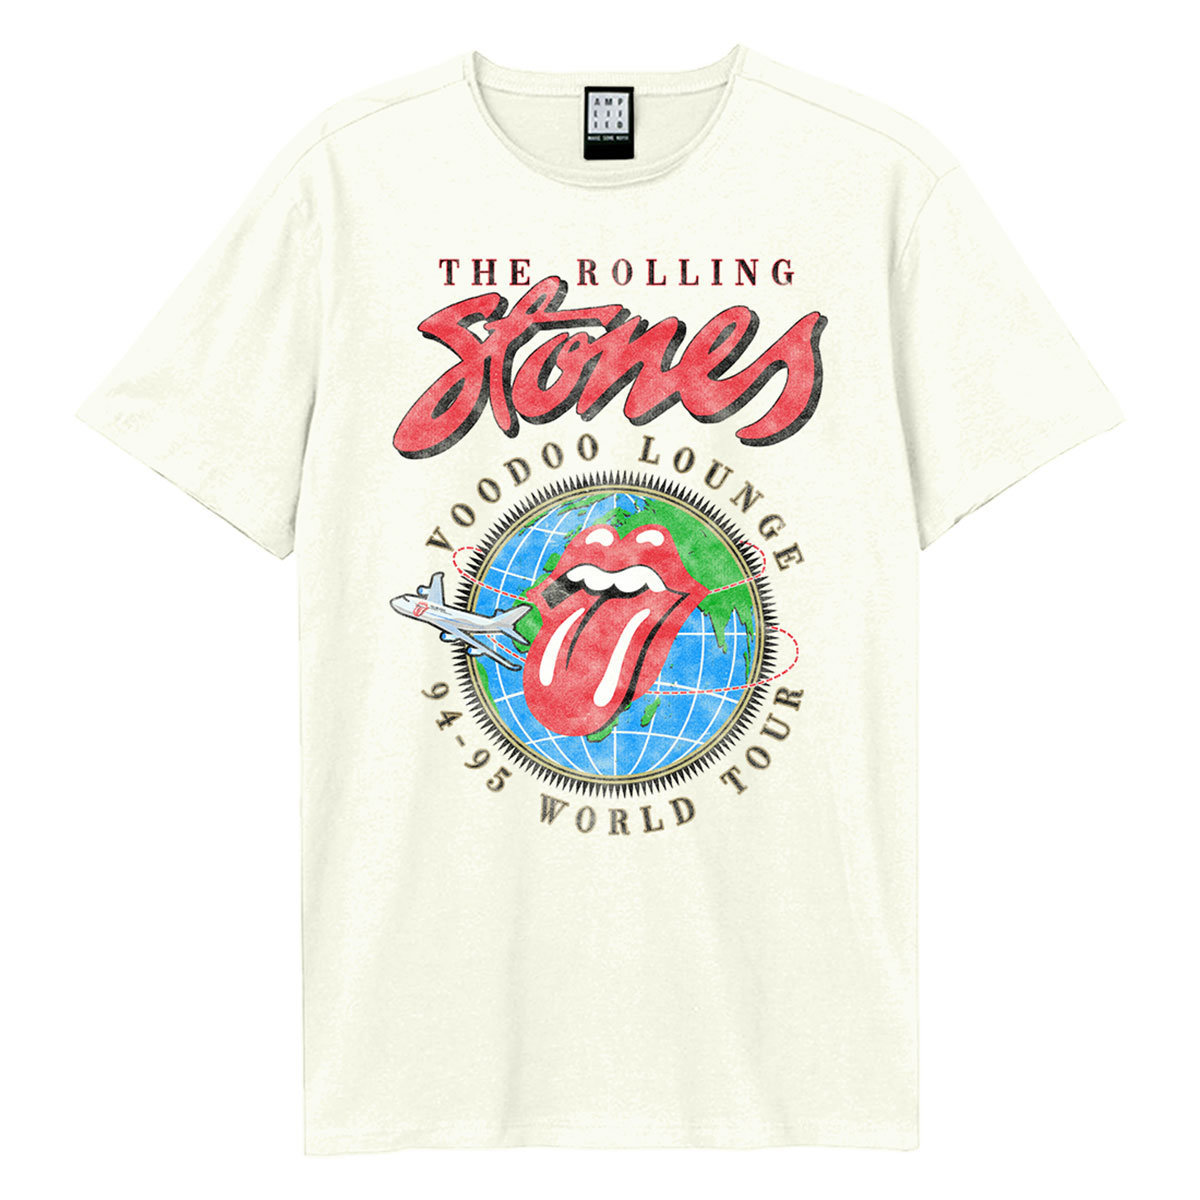 The Rolling Stones Voodoo Lounge Tour